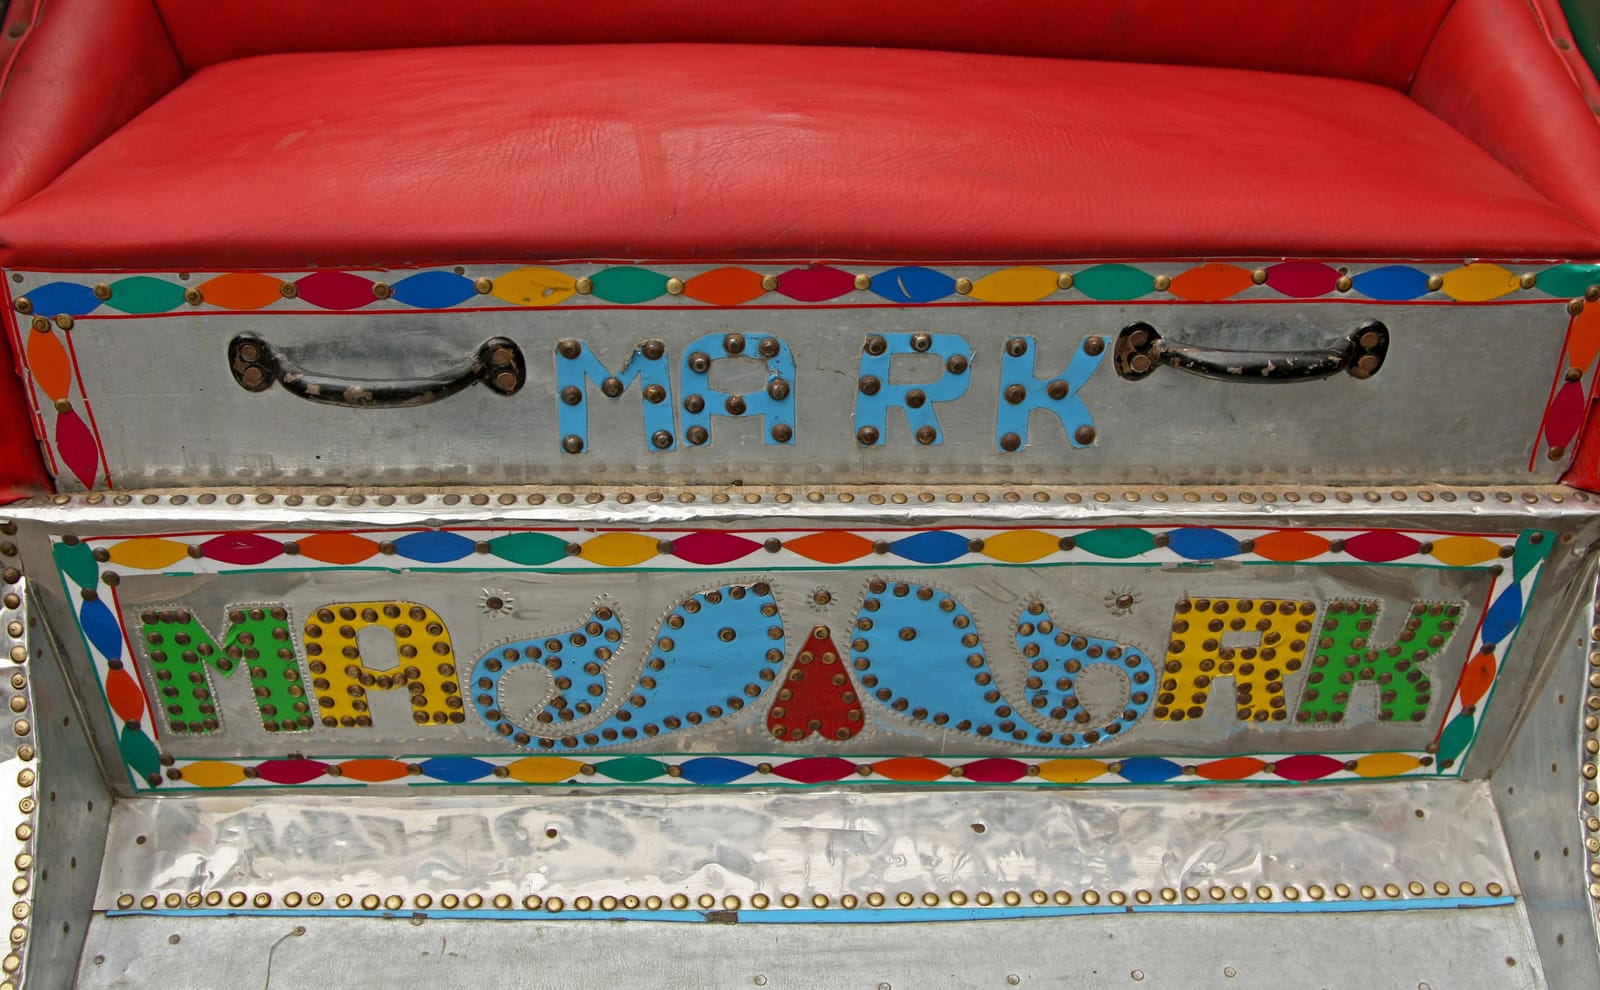 Cushioned red seat in a vehicle for transporting passengers. Below this, using a combination of rivets and paintwork, are letters that read "Mark" and decorative elements that include two blue fish either side of an upsidedown heart shape.